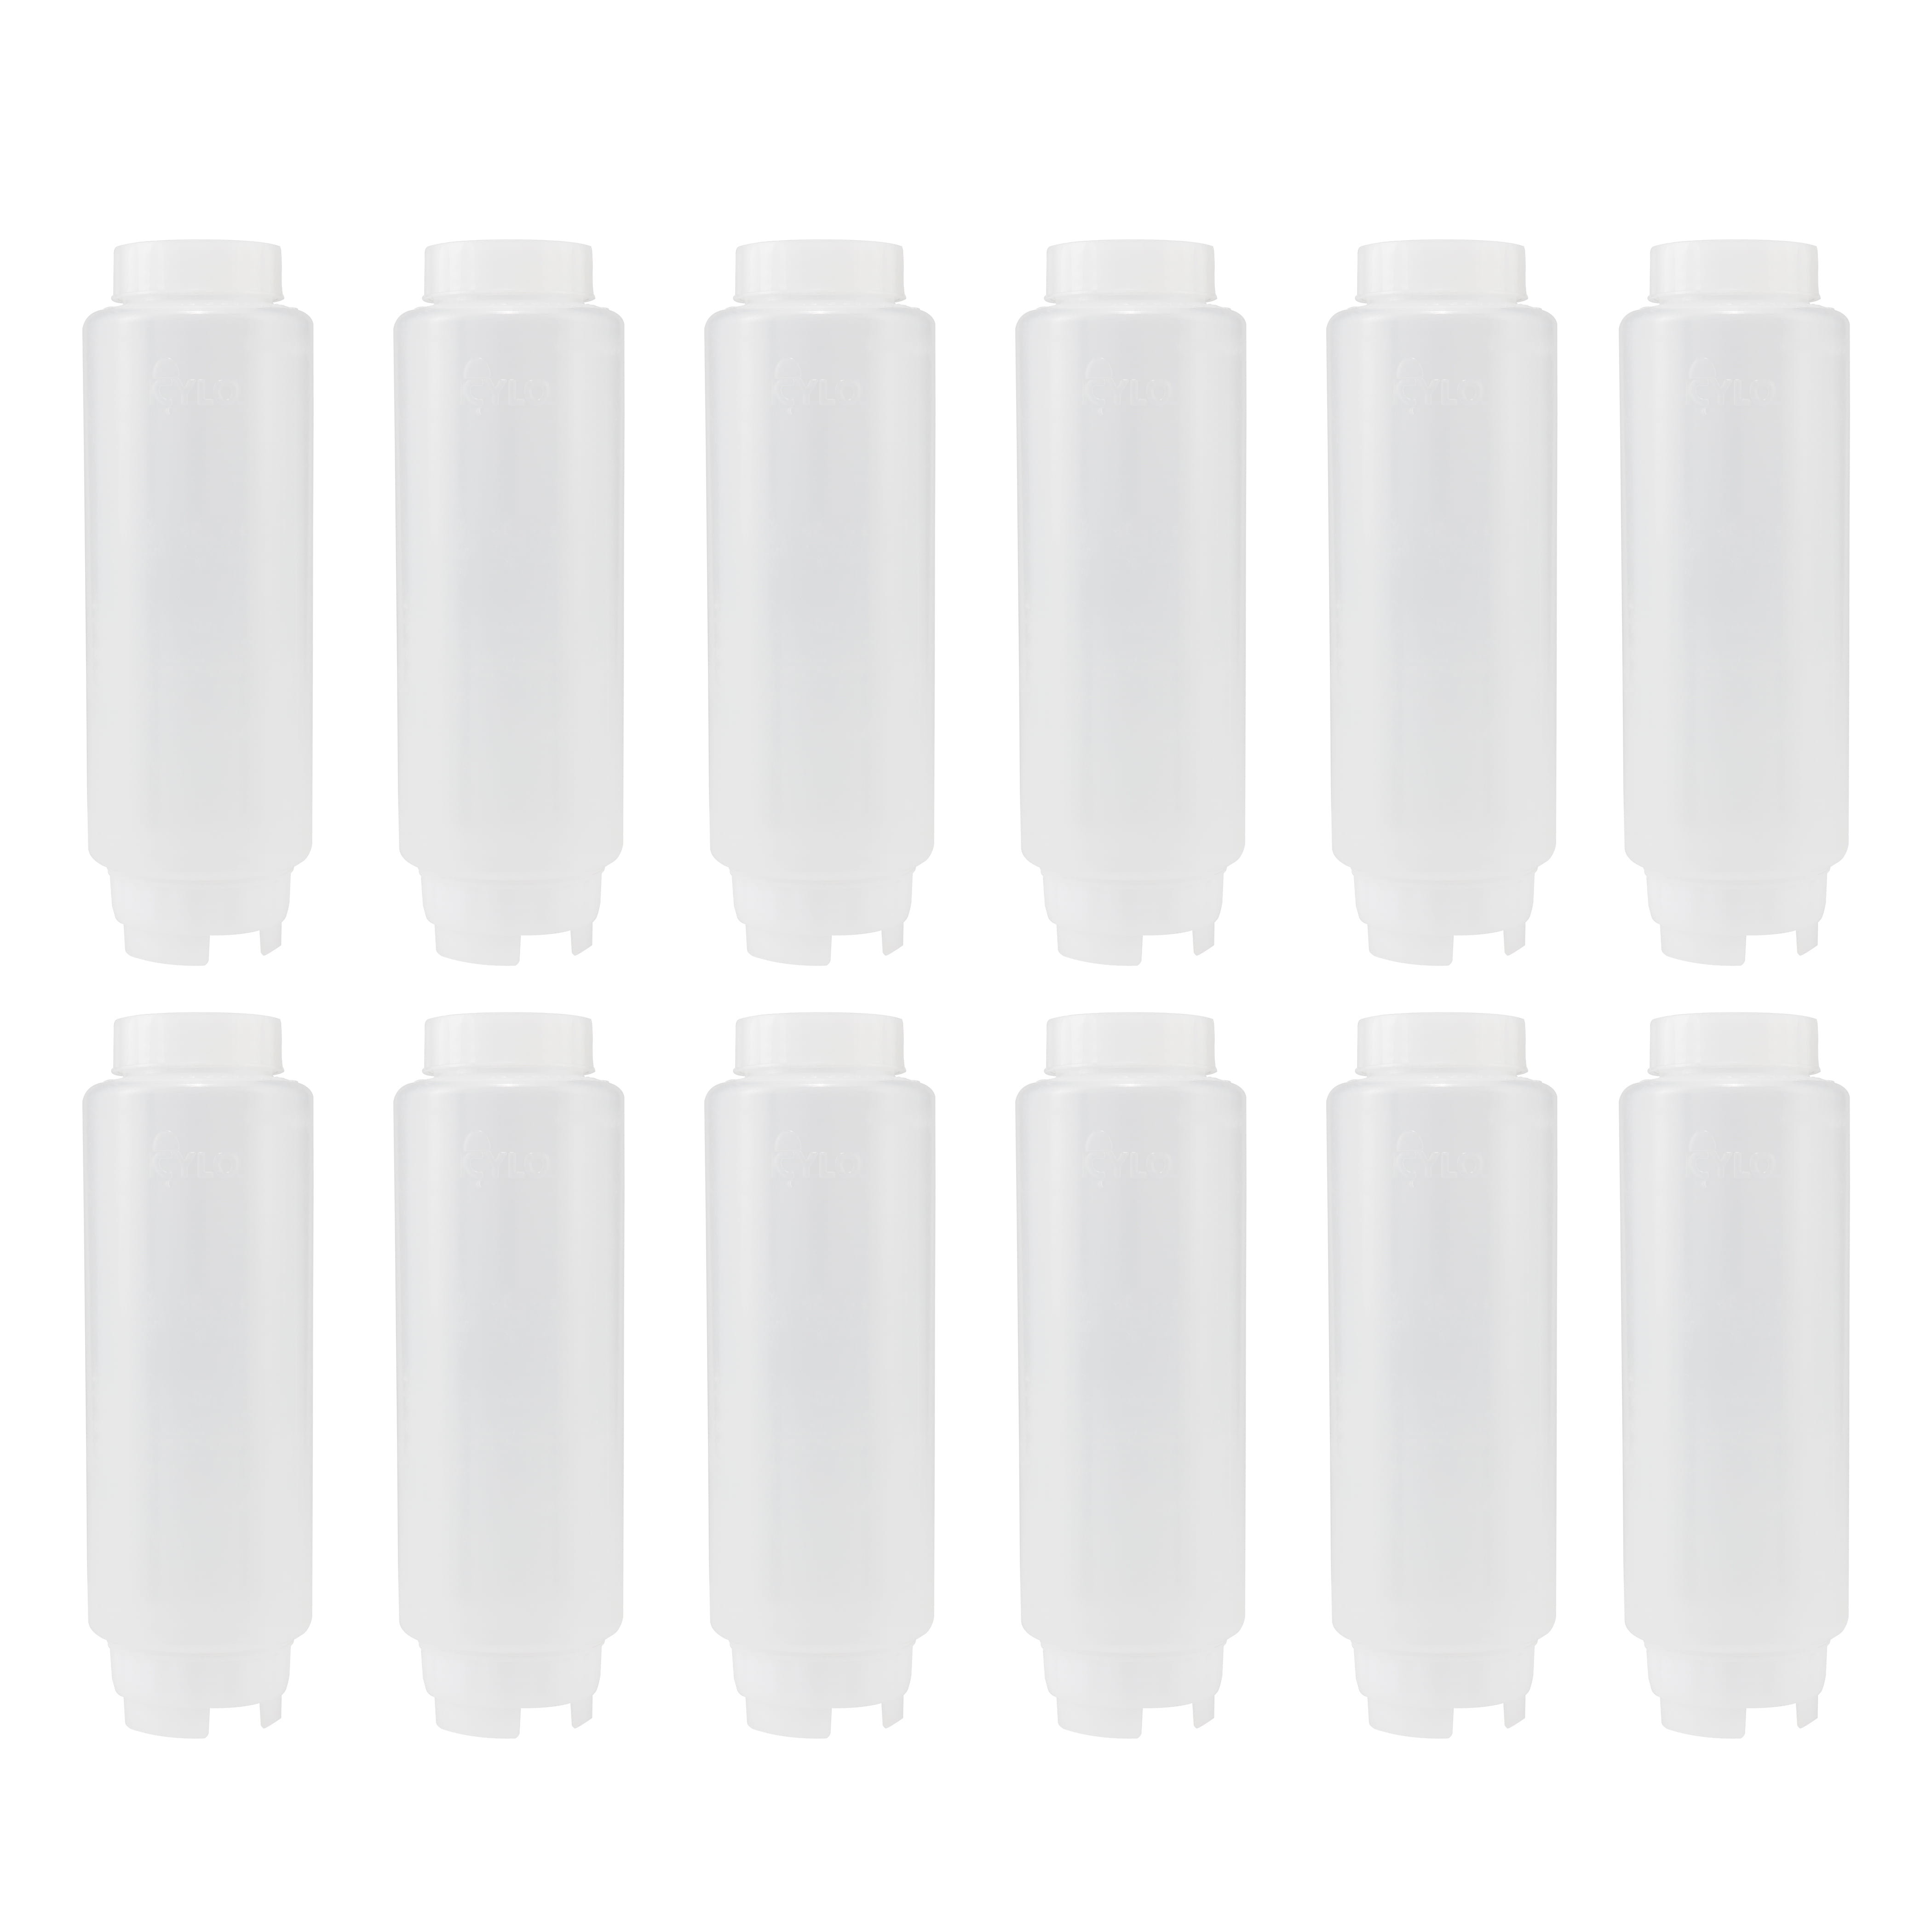 BUBABOX 10 Pcs 4 Oz Plastic Squeeze Bottles, Squirt Bottles with Twist Top  Cap and Funnels, Clear Pour Bottle Plastic, Paint Squeeze Bottle for Paint,  Glue, Crafts, Ink, Liquids, Oil 